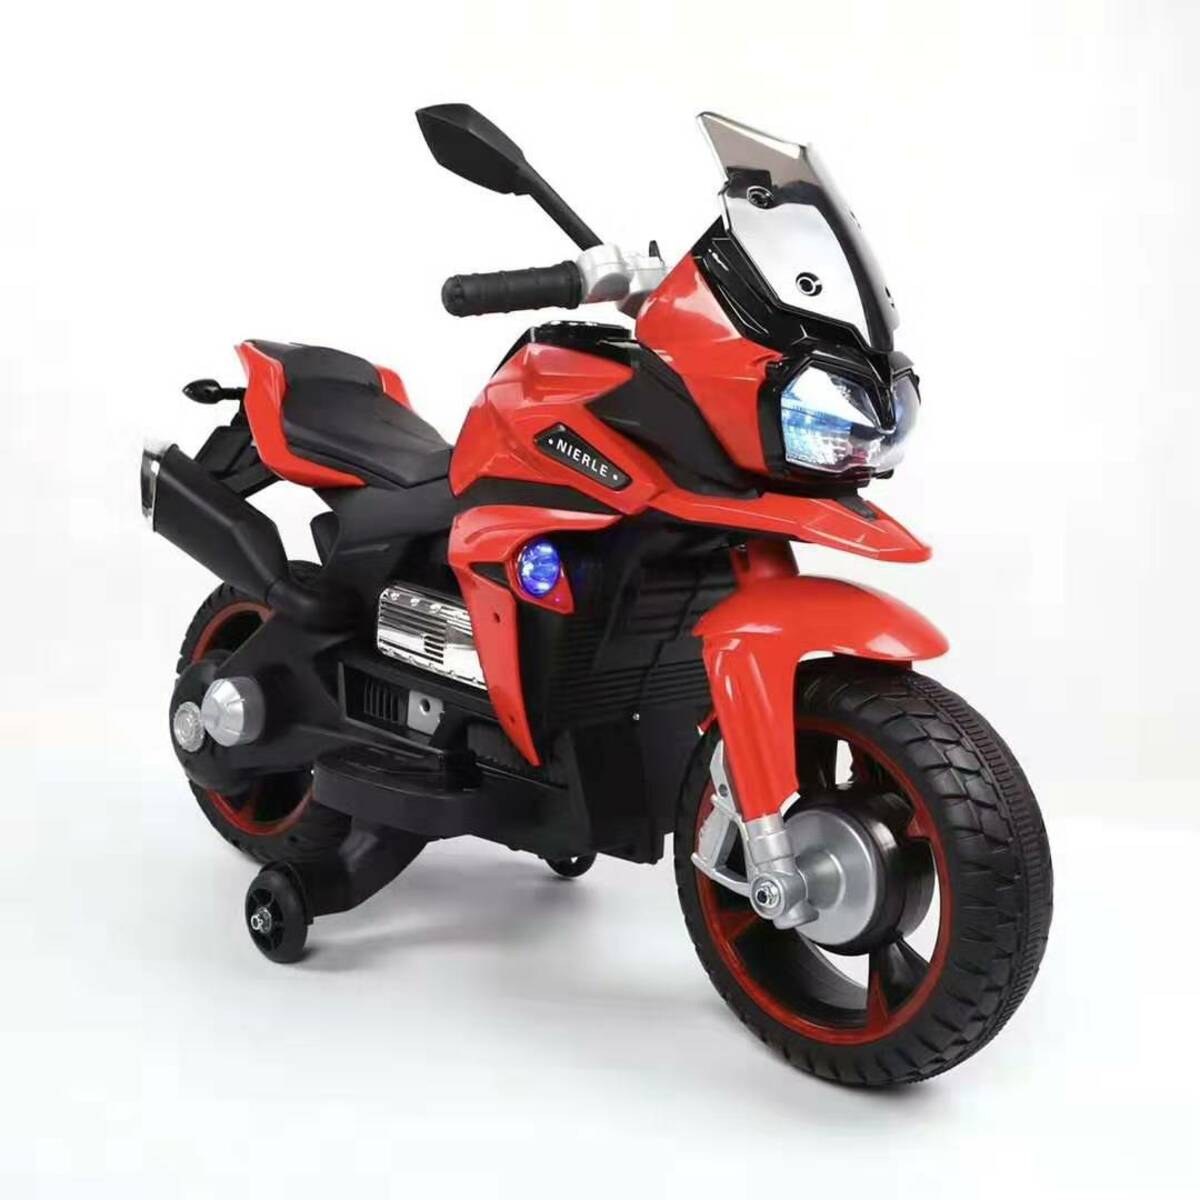 Skid Fusion Rechargeable Motor Bike NEL-R800GS Assorted Color